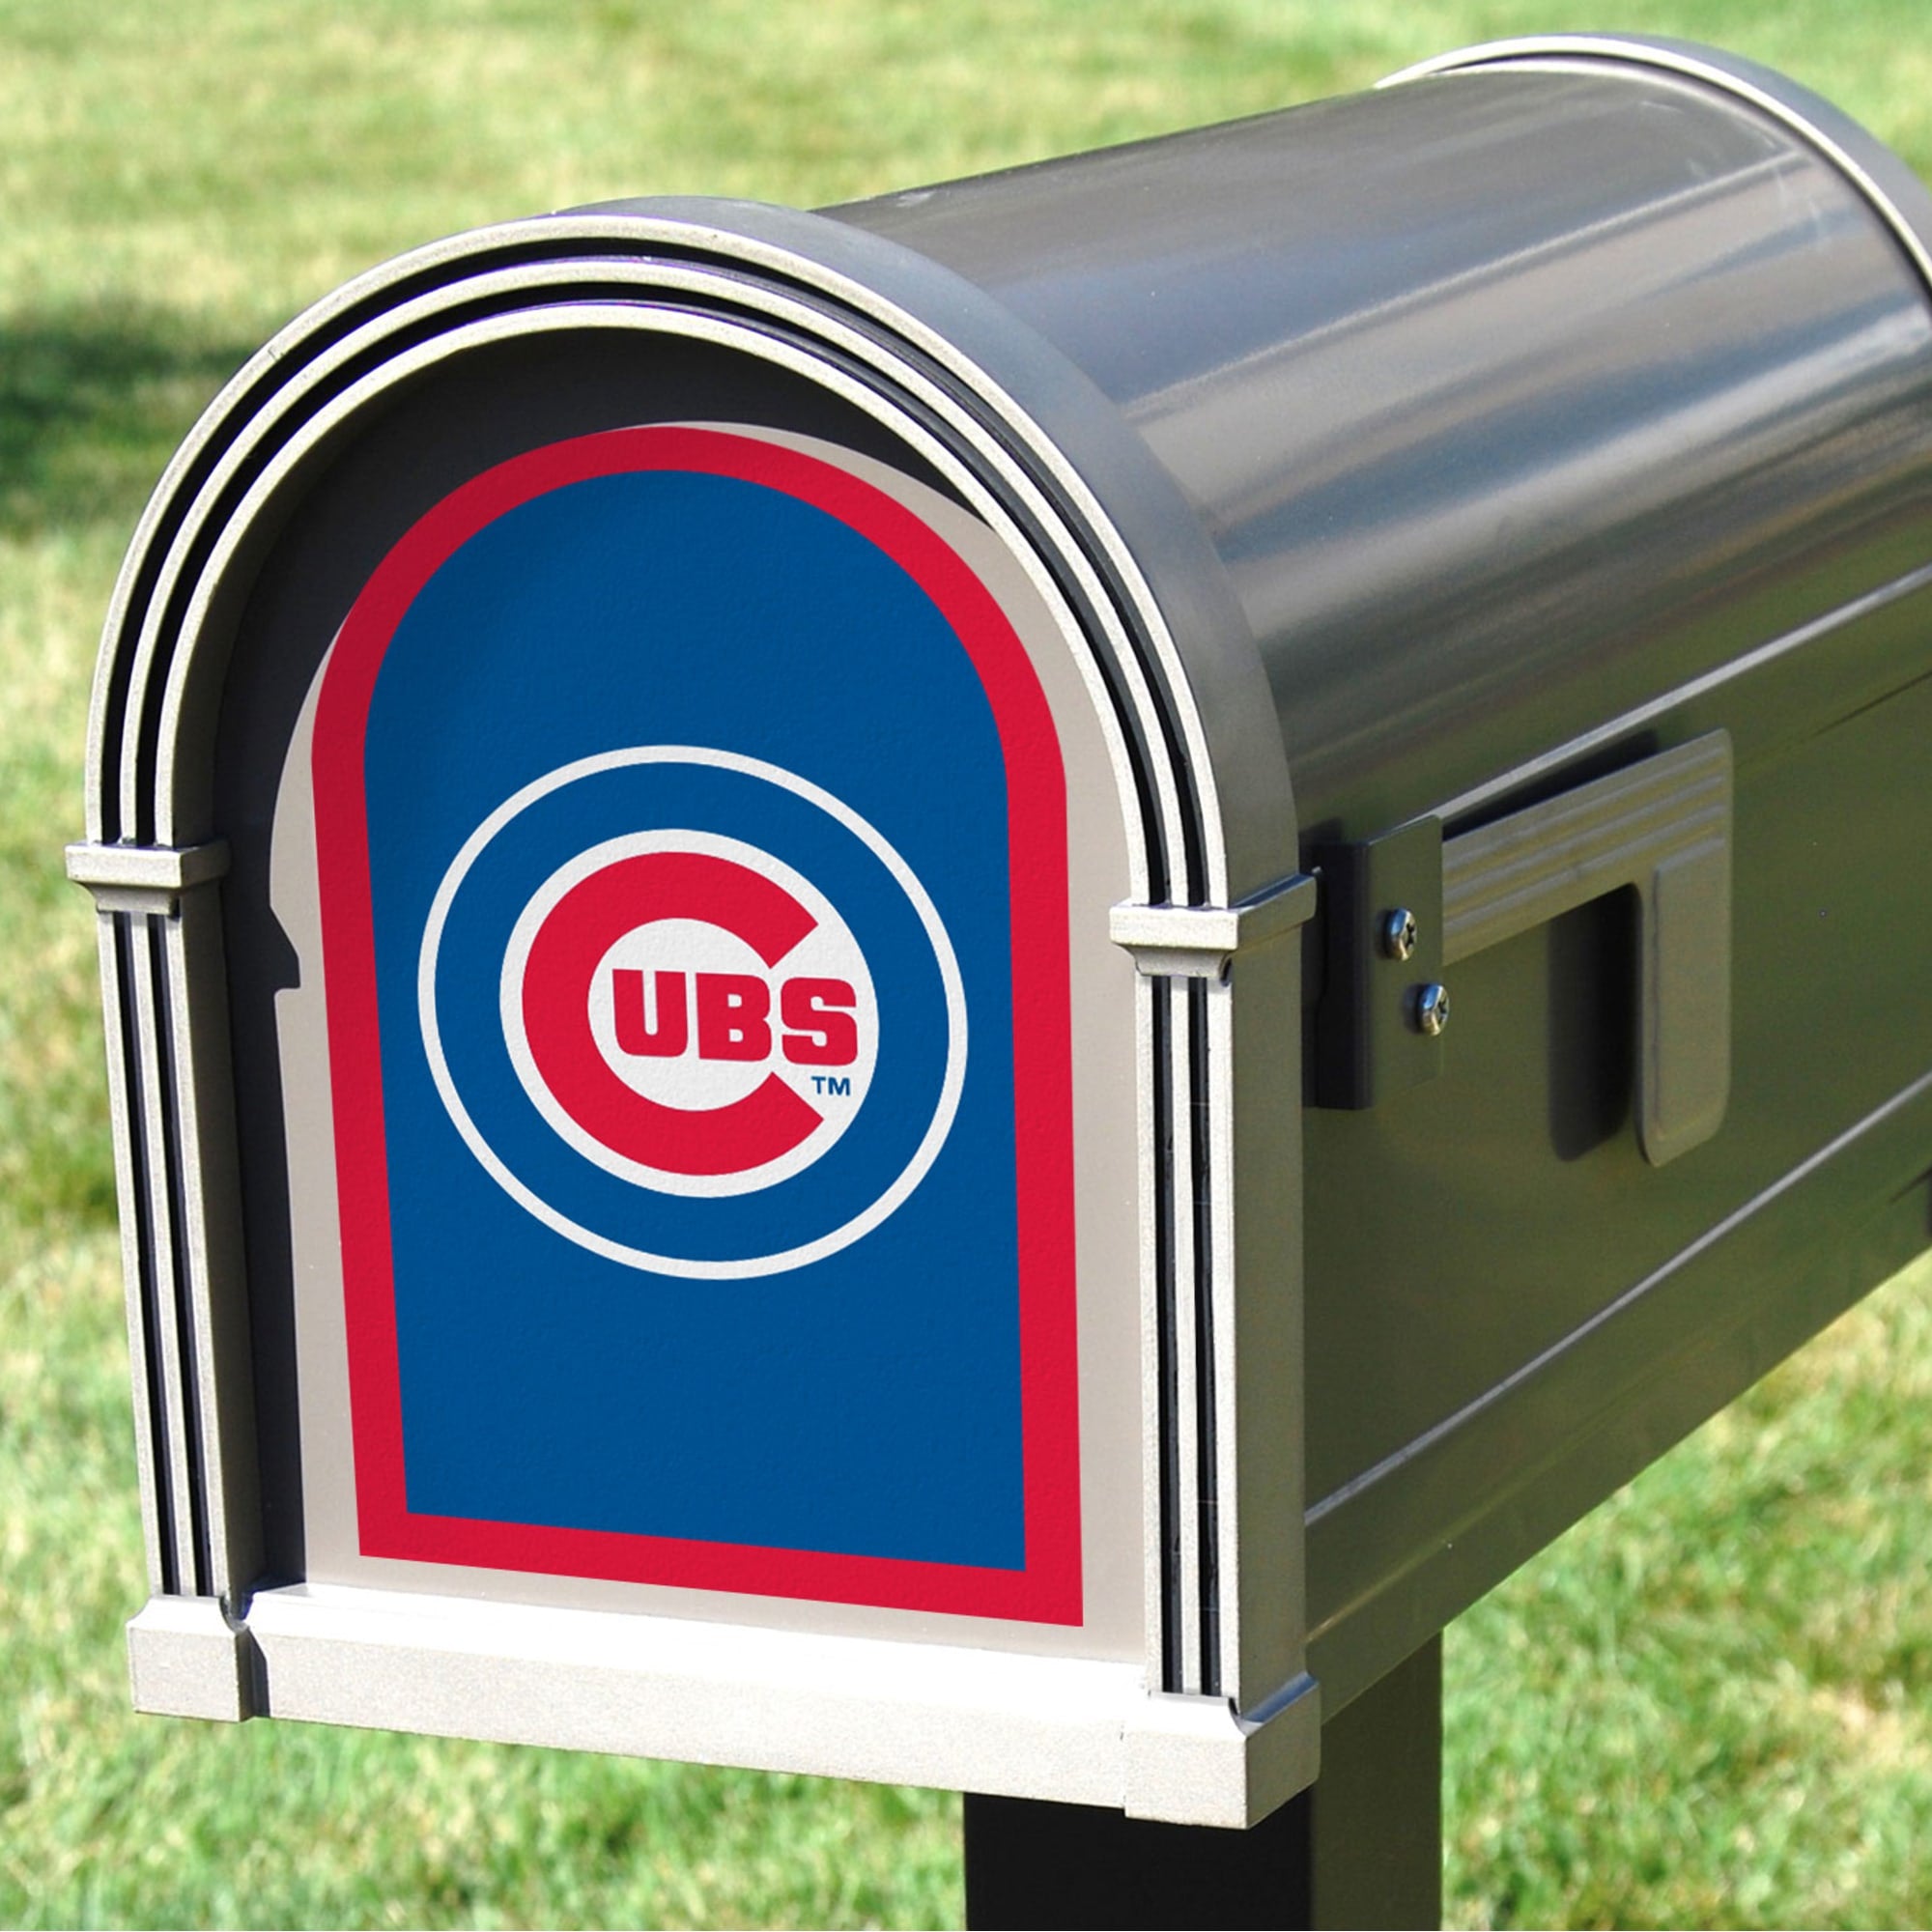 Chicago Cubs: Mailbox Logo - Officially Licensed MLB Outdoor Graphic 5.0"W x 8.0"H by Fathead | Wood/Aluminum